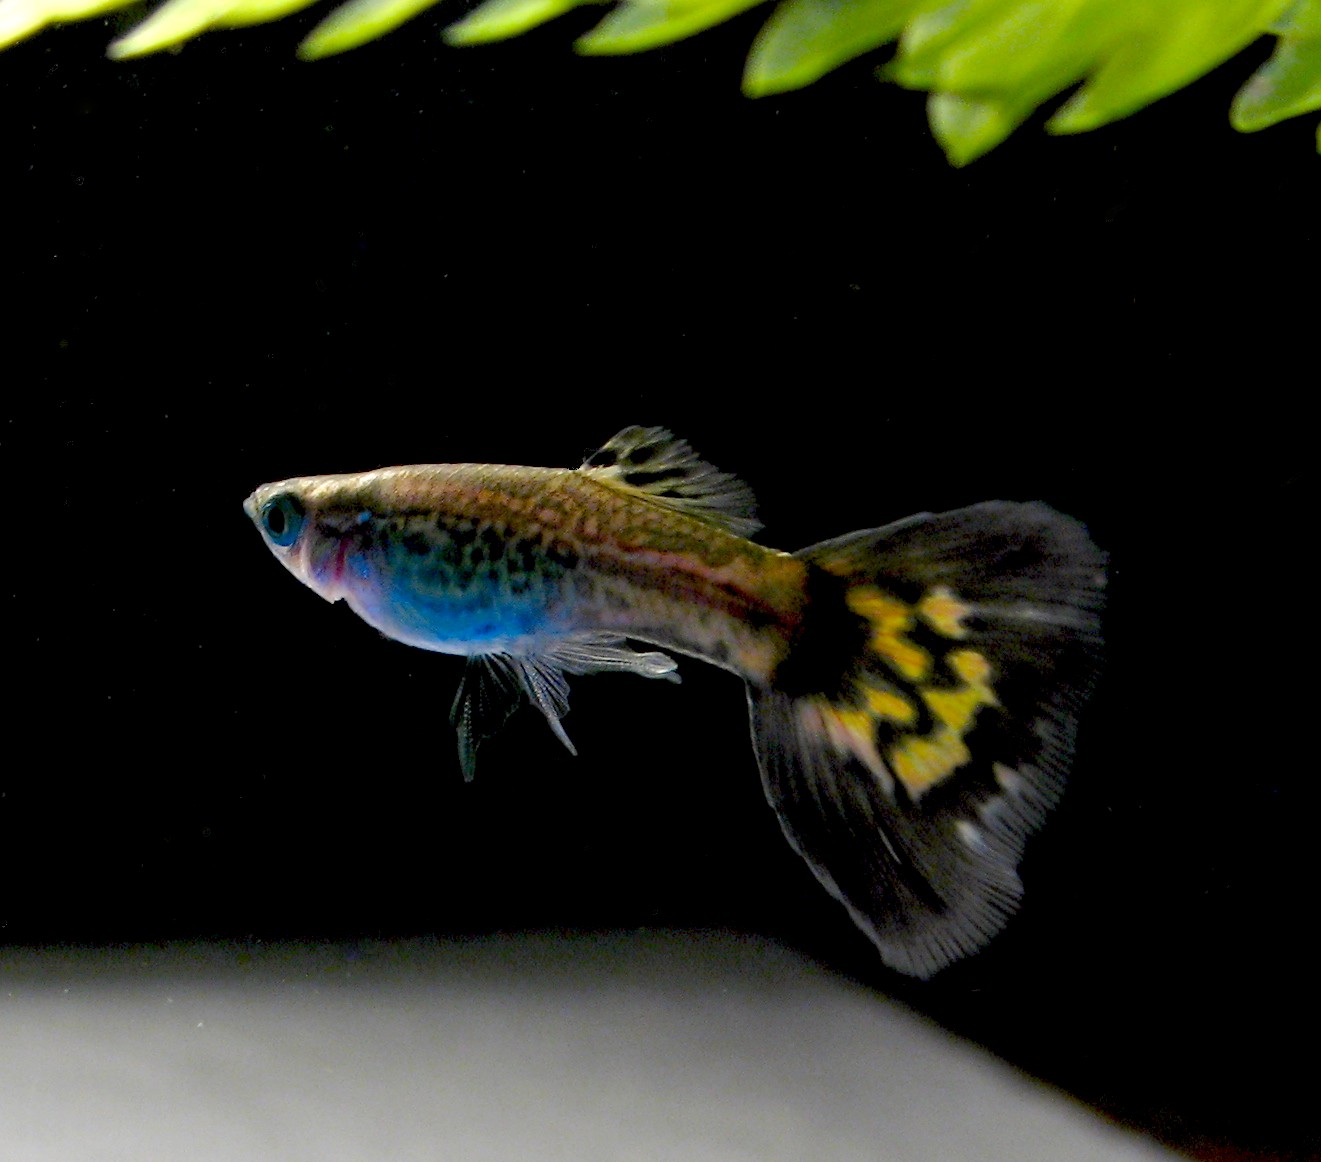 Pay Attention To The Color Of The Guppy Fin